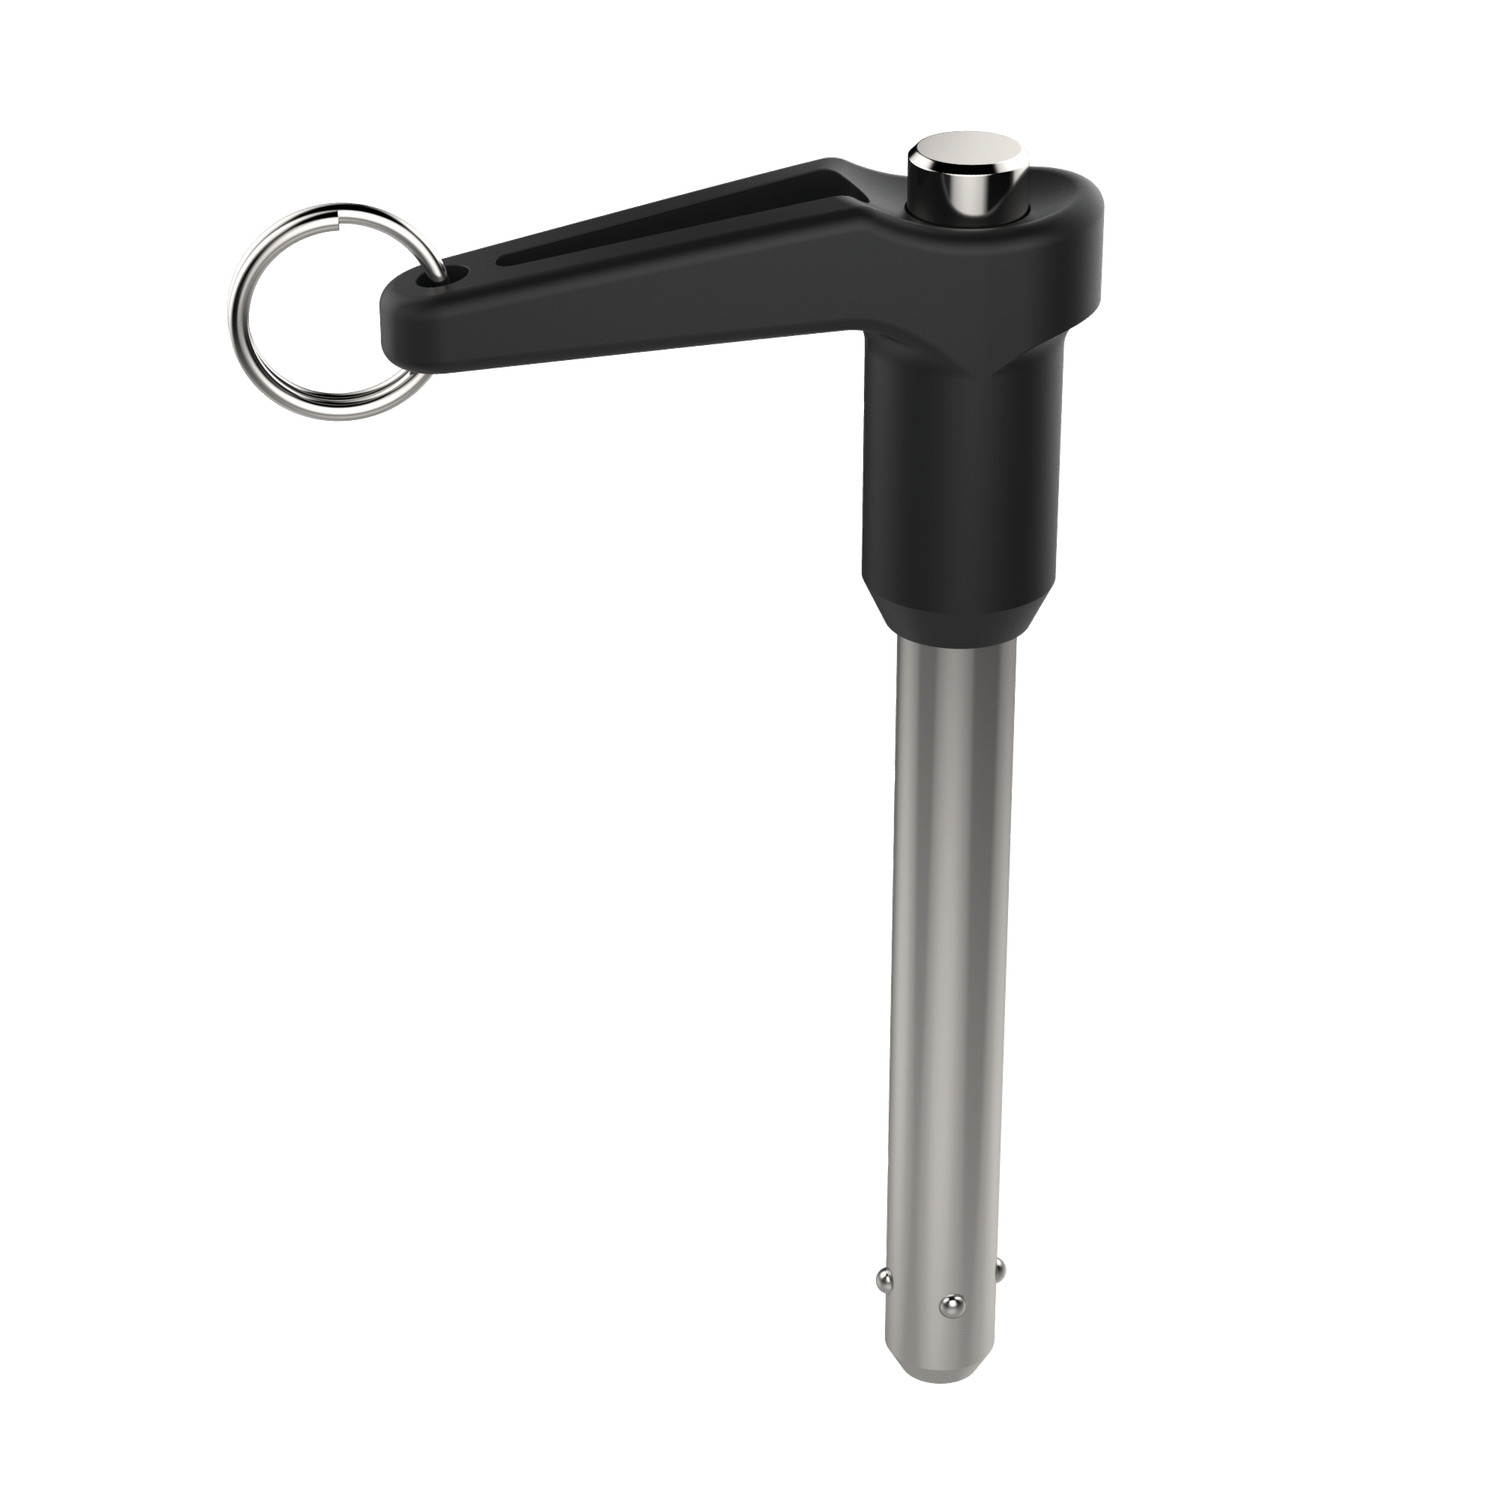 Product 33620, Aviation Pip-Pin, Standard LA Handle single acting, quick release pins - according to NASM 17986 / 